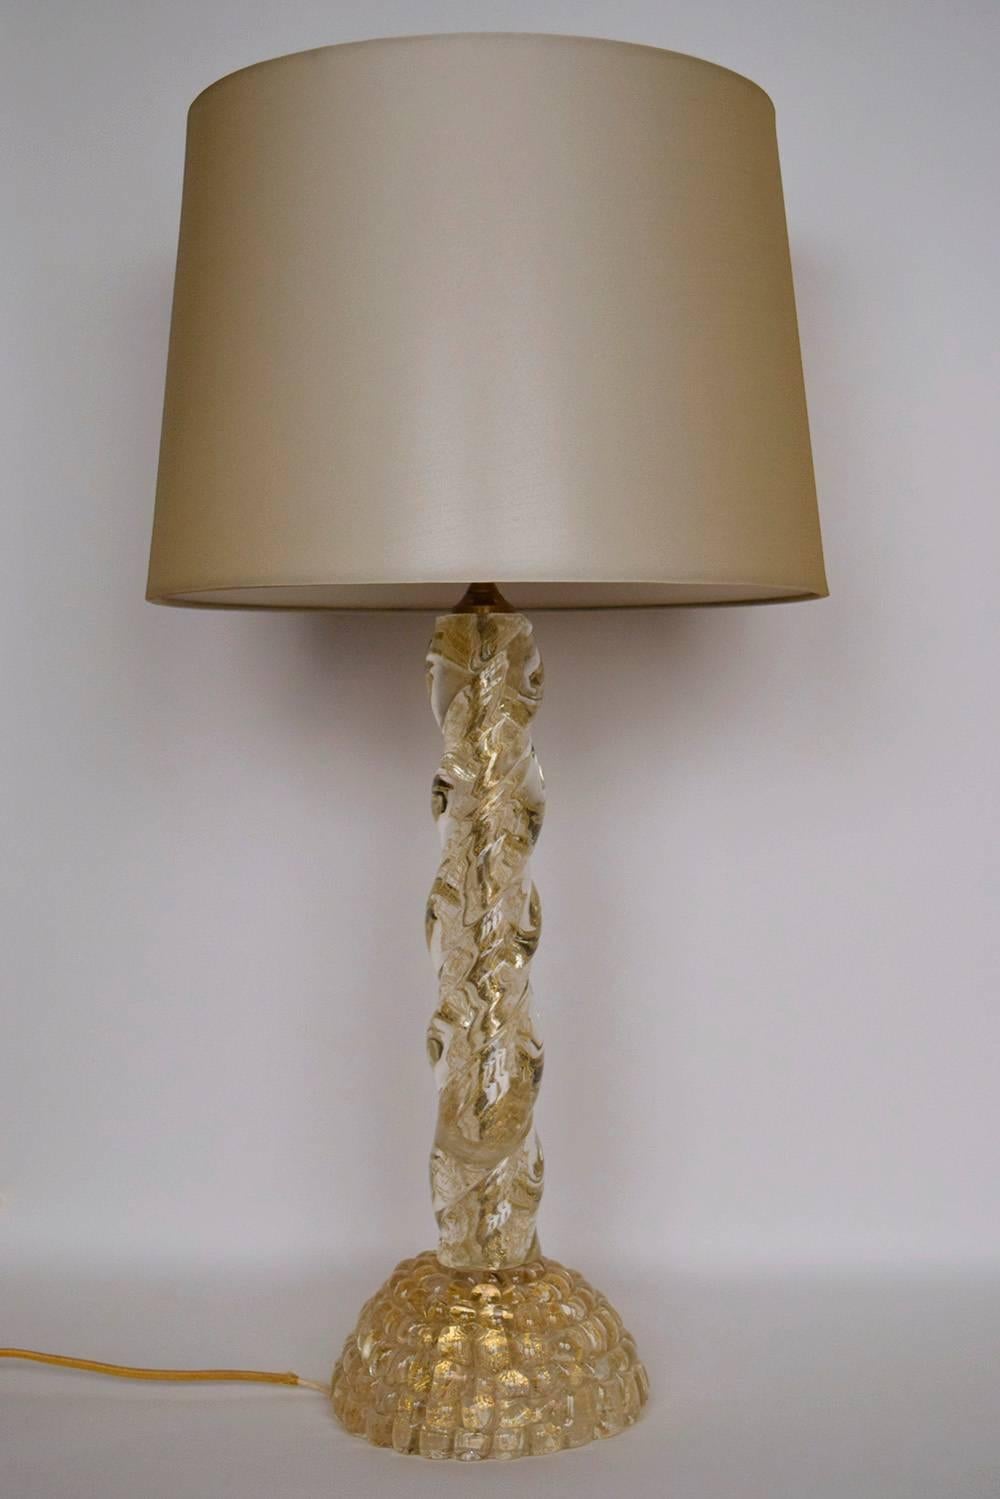 This beautiful pair of Murano-style table lamps feature a twisted-column with a dome design base made of Murano glass. Both lamps feature see-through glass with gold accent specks inside of the thick Murano glass. These lamps are wired to US